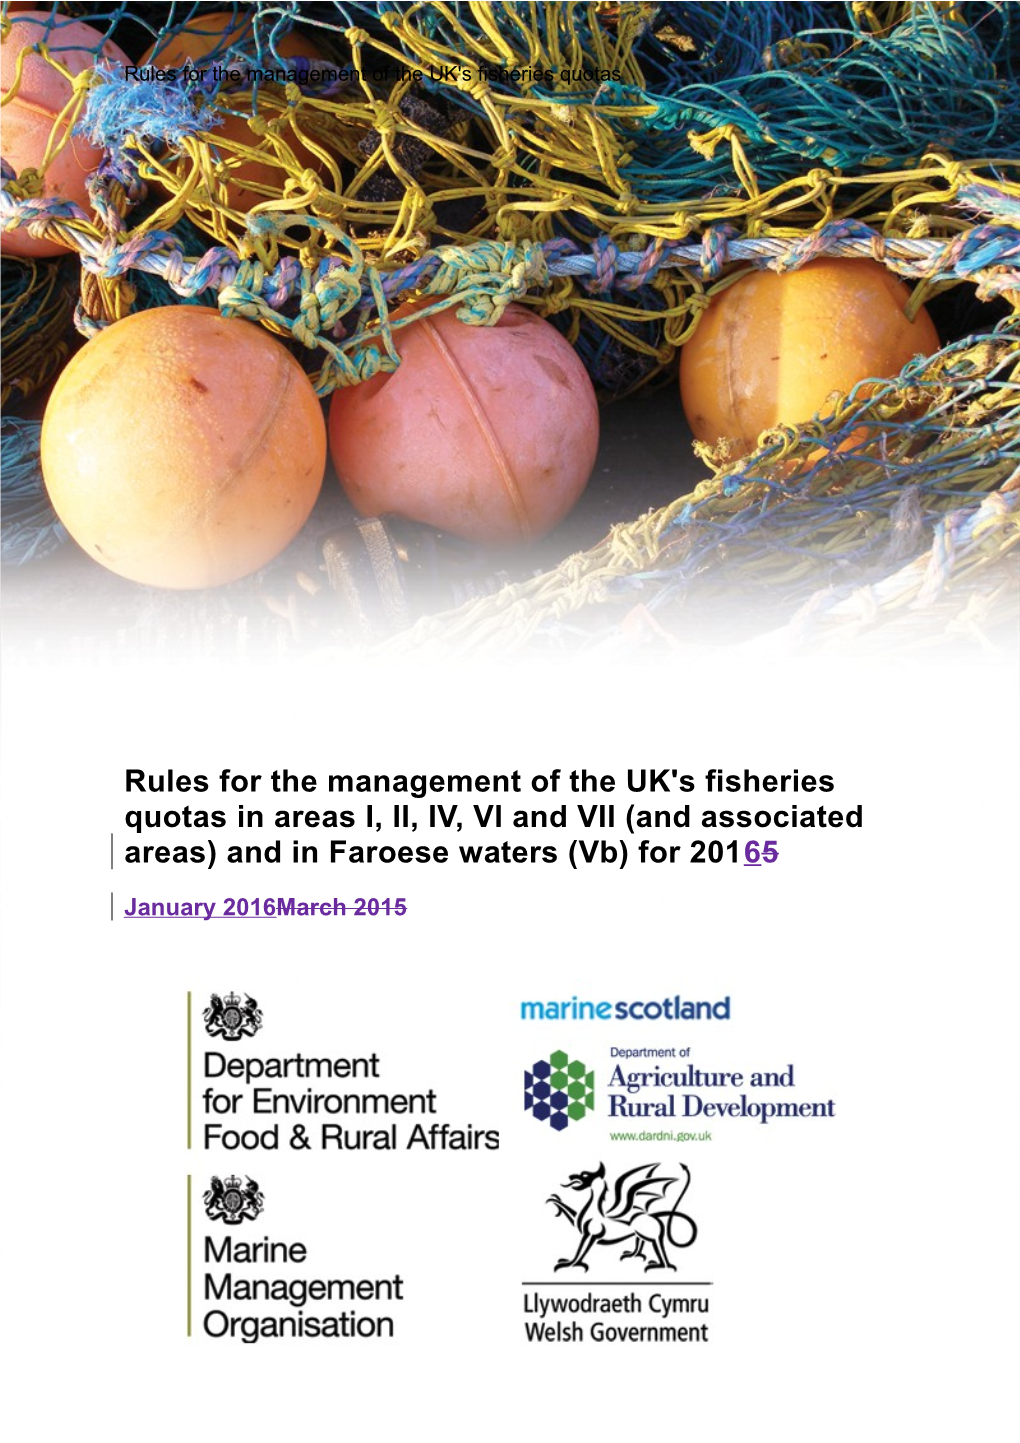 Draft Raules for the Management of the UK's Fisheries Quotas in Areas I, II, IV, VI And